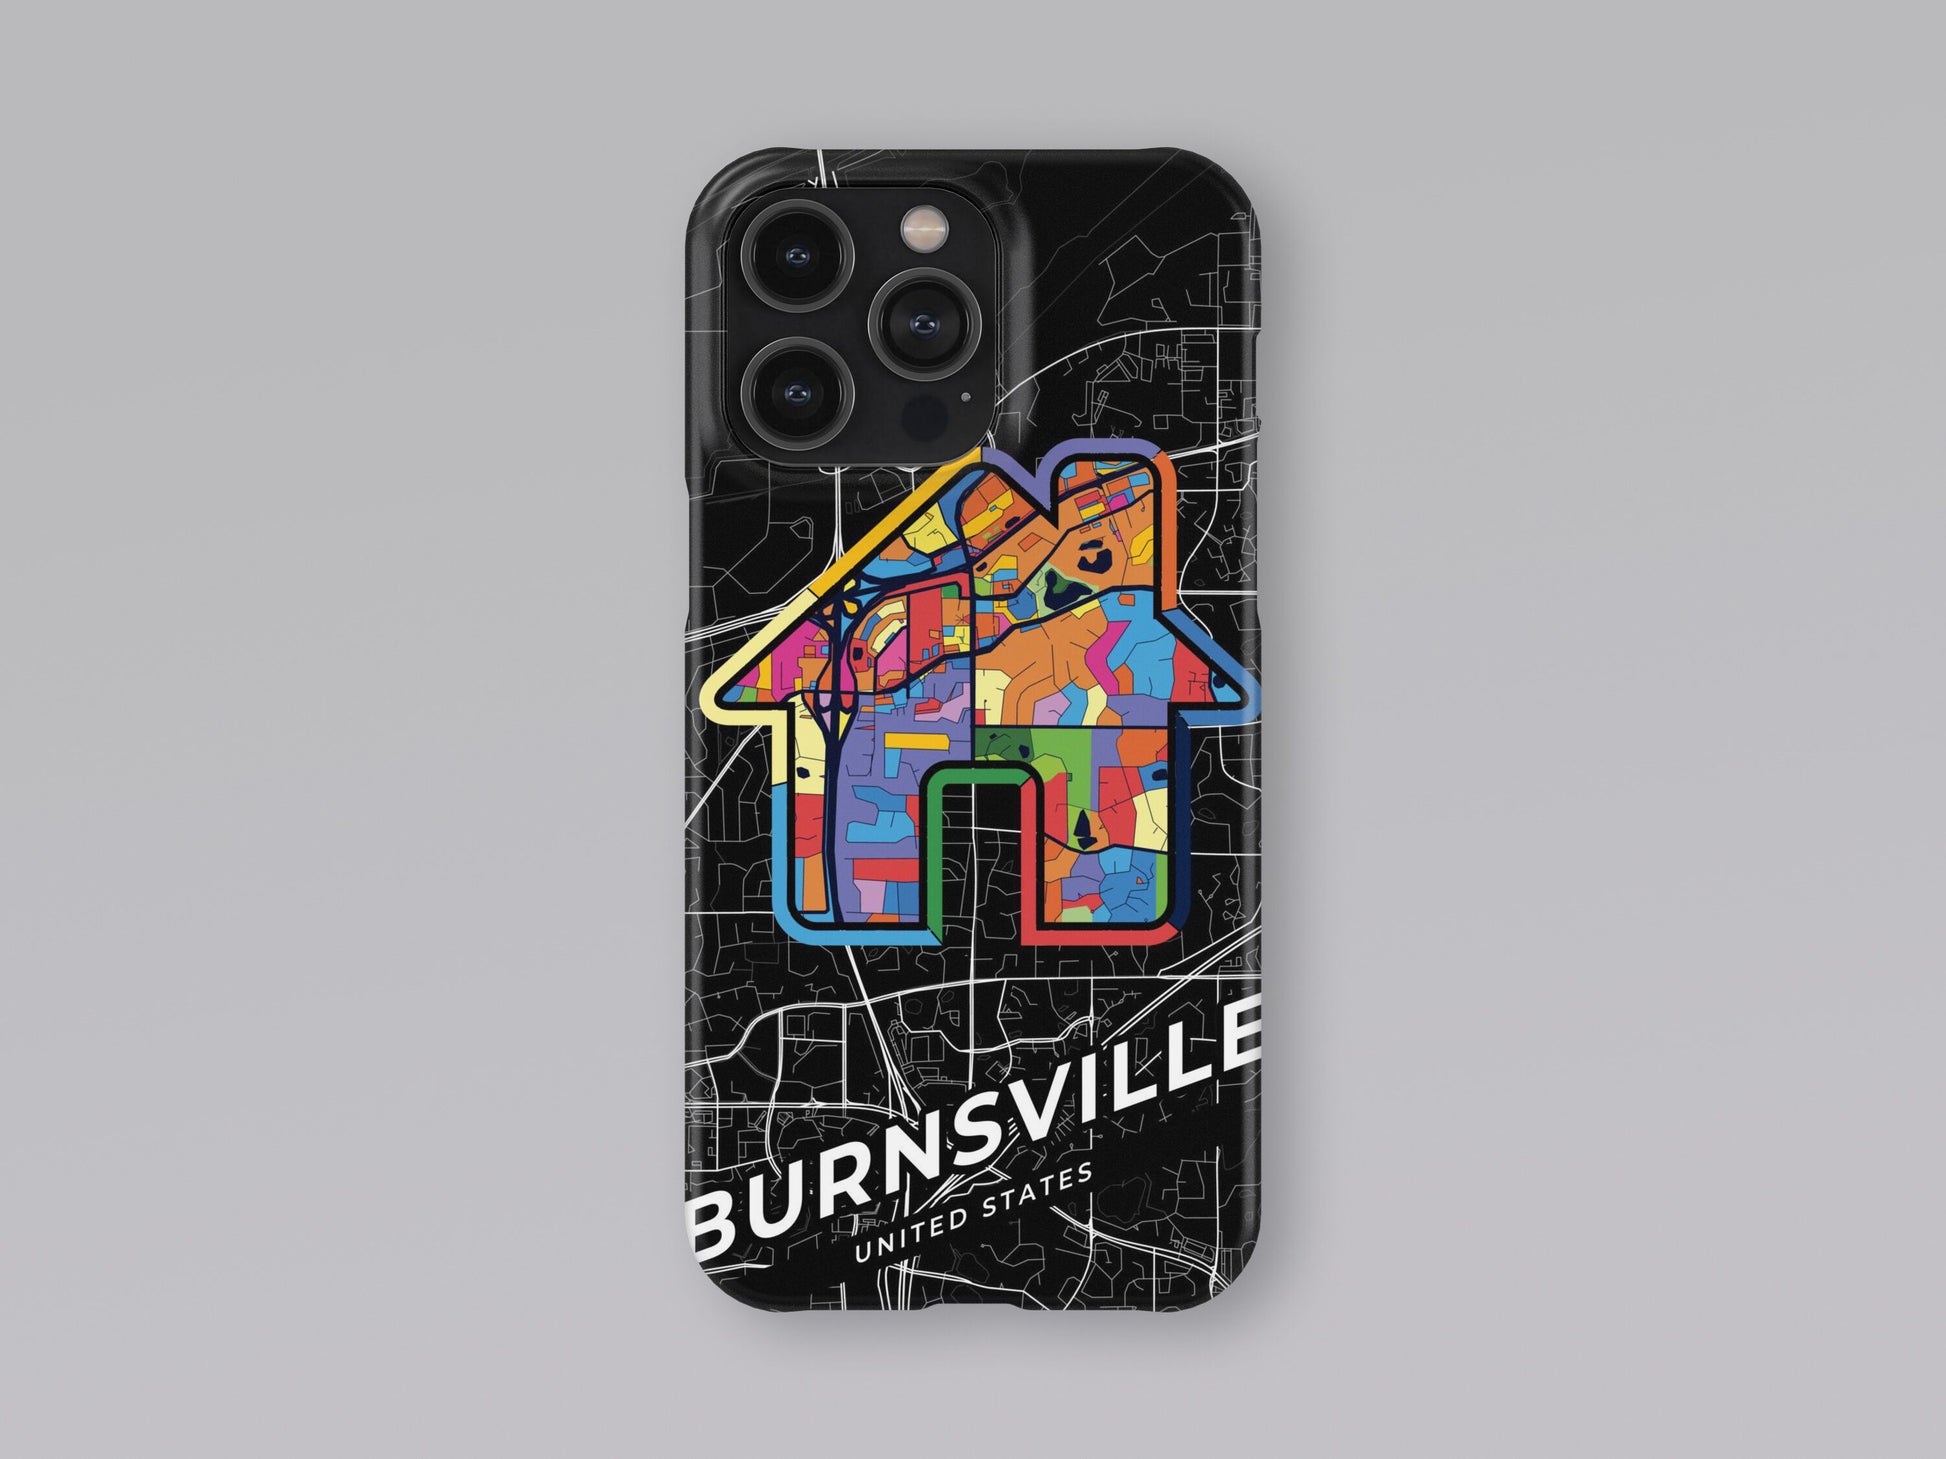 Burnsville Minnesota slim phone case with colorful icon. Birthday, wedding or housewarming gift. Couple match cases. 3